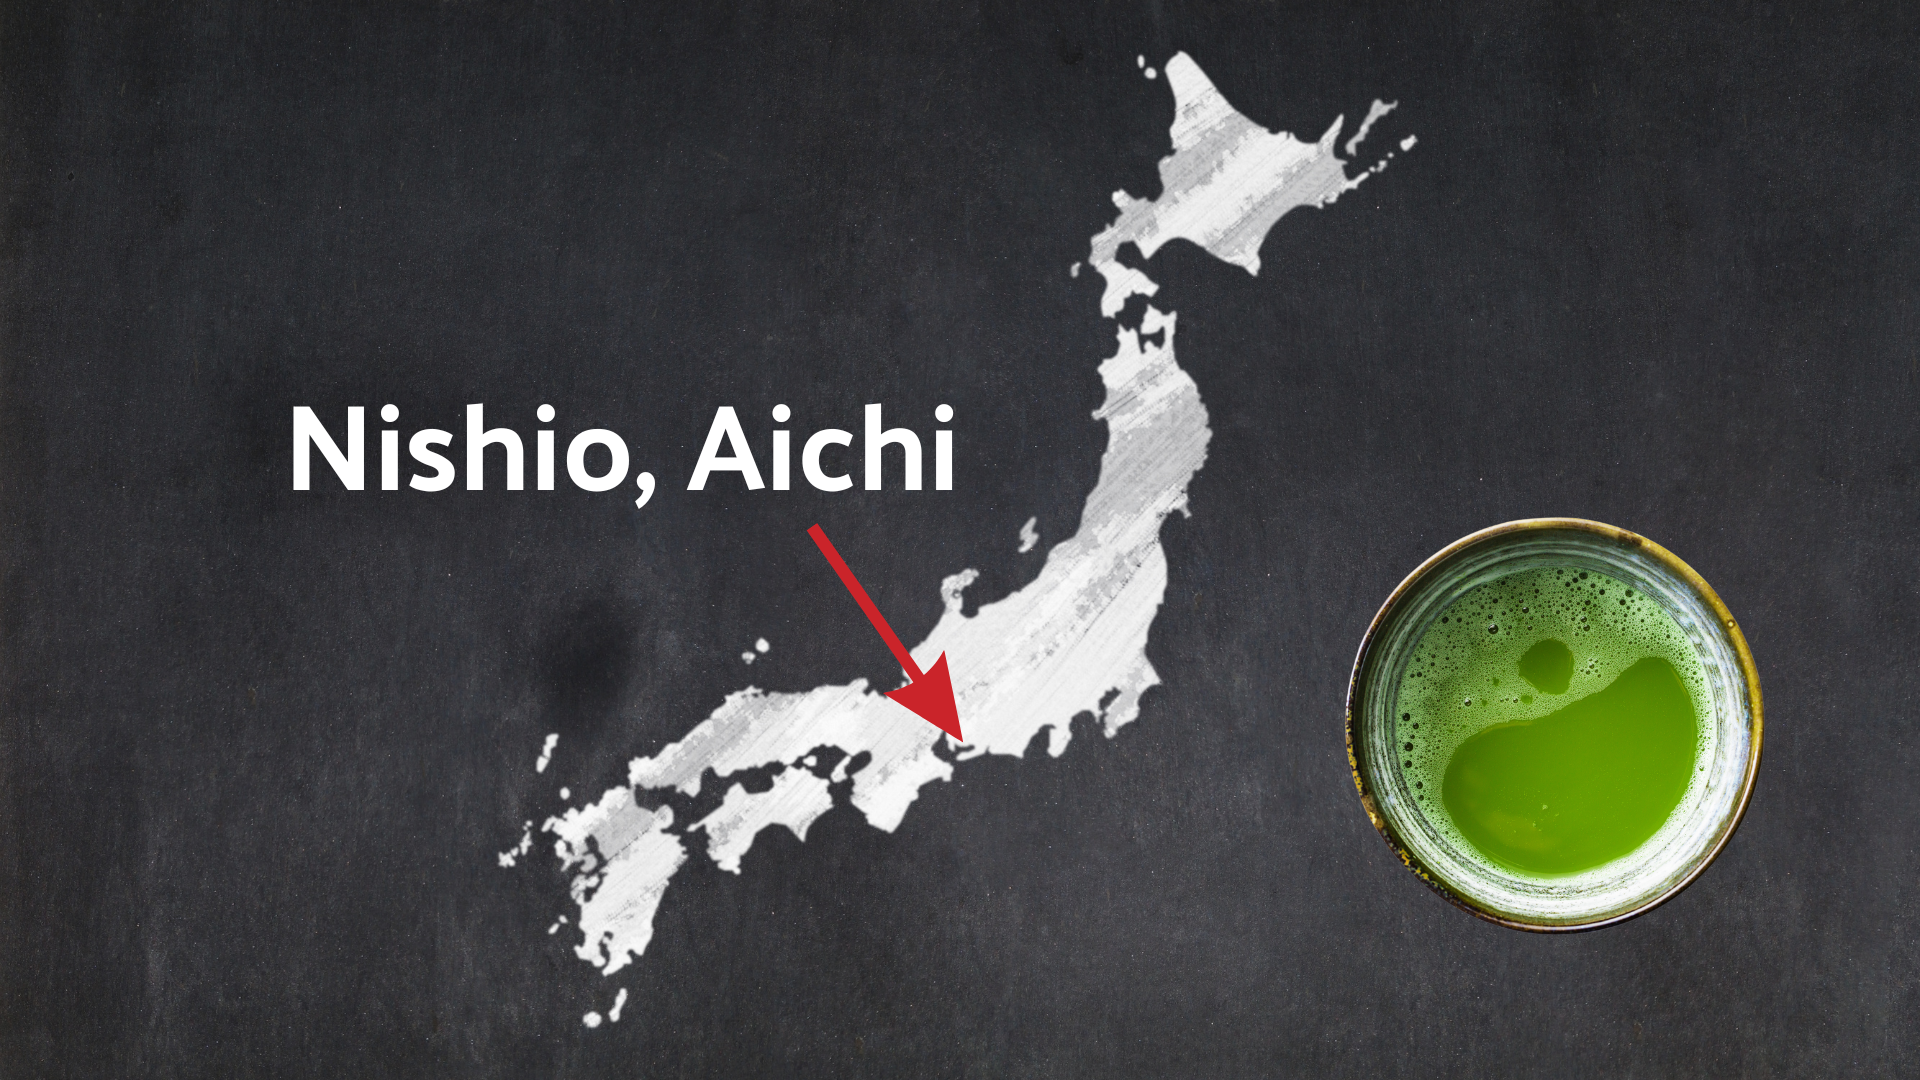 Bowl of matcha next to a map of Japan with an arrow to Nishio, Aichi